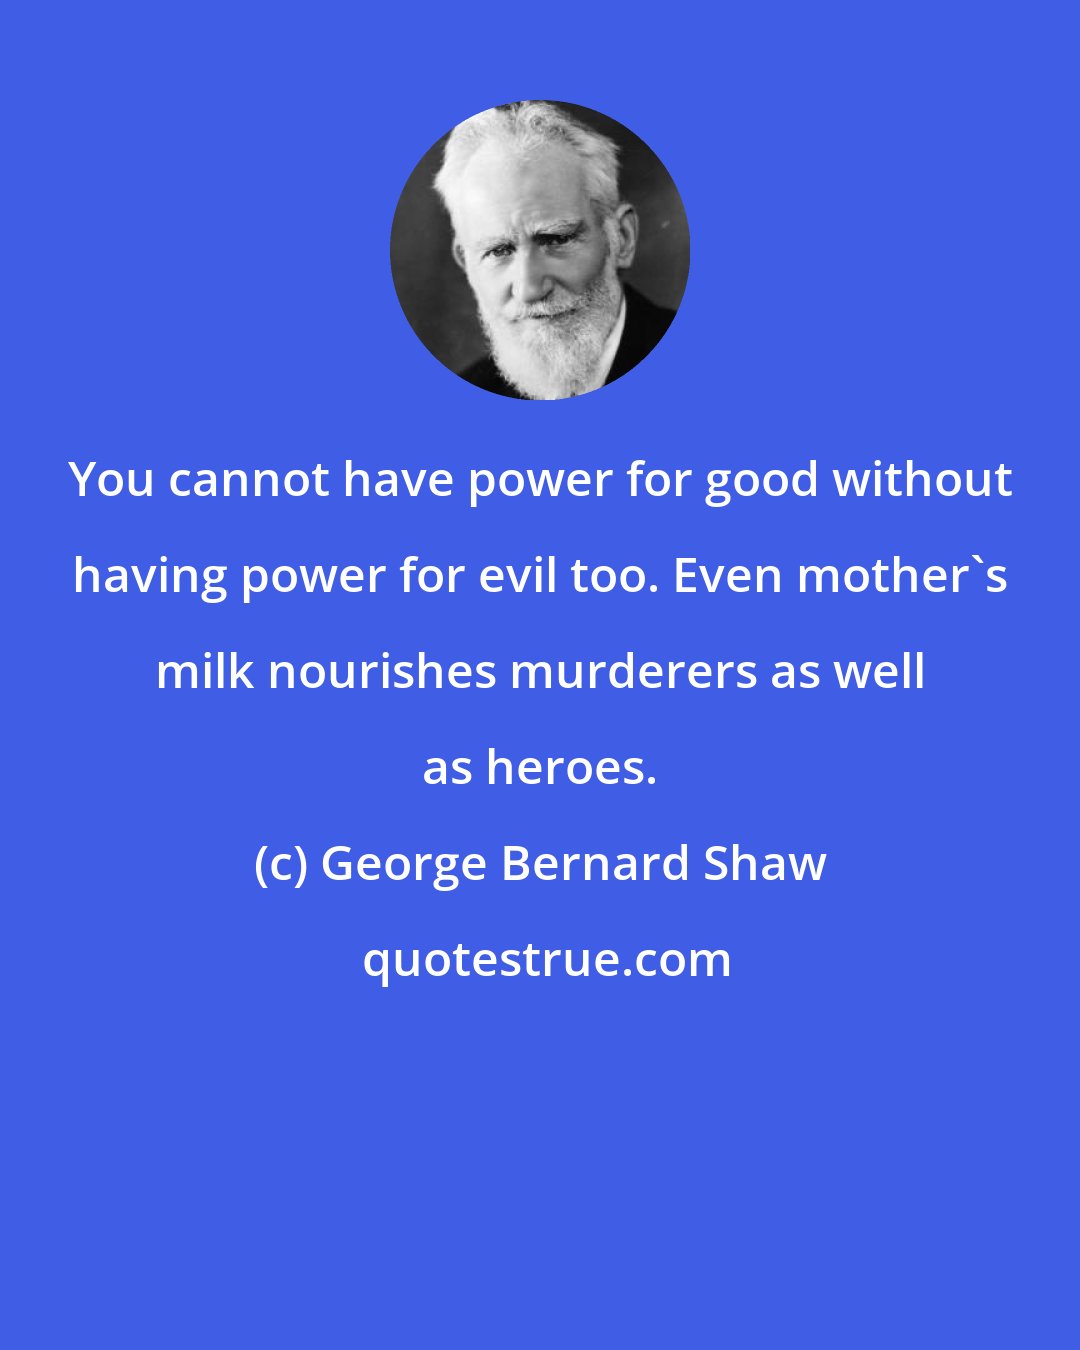 George Bernard Shaw: You cannot have power for good without having power for evil too. Even mother's milk nourishes murderers as well as heroes.